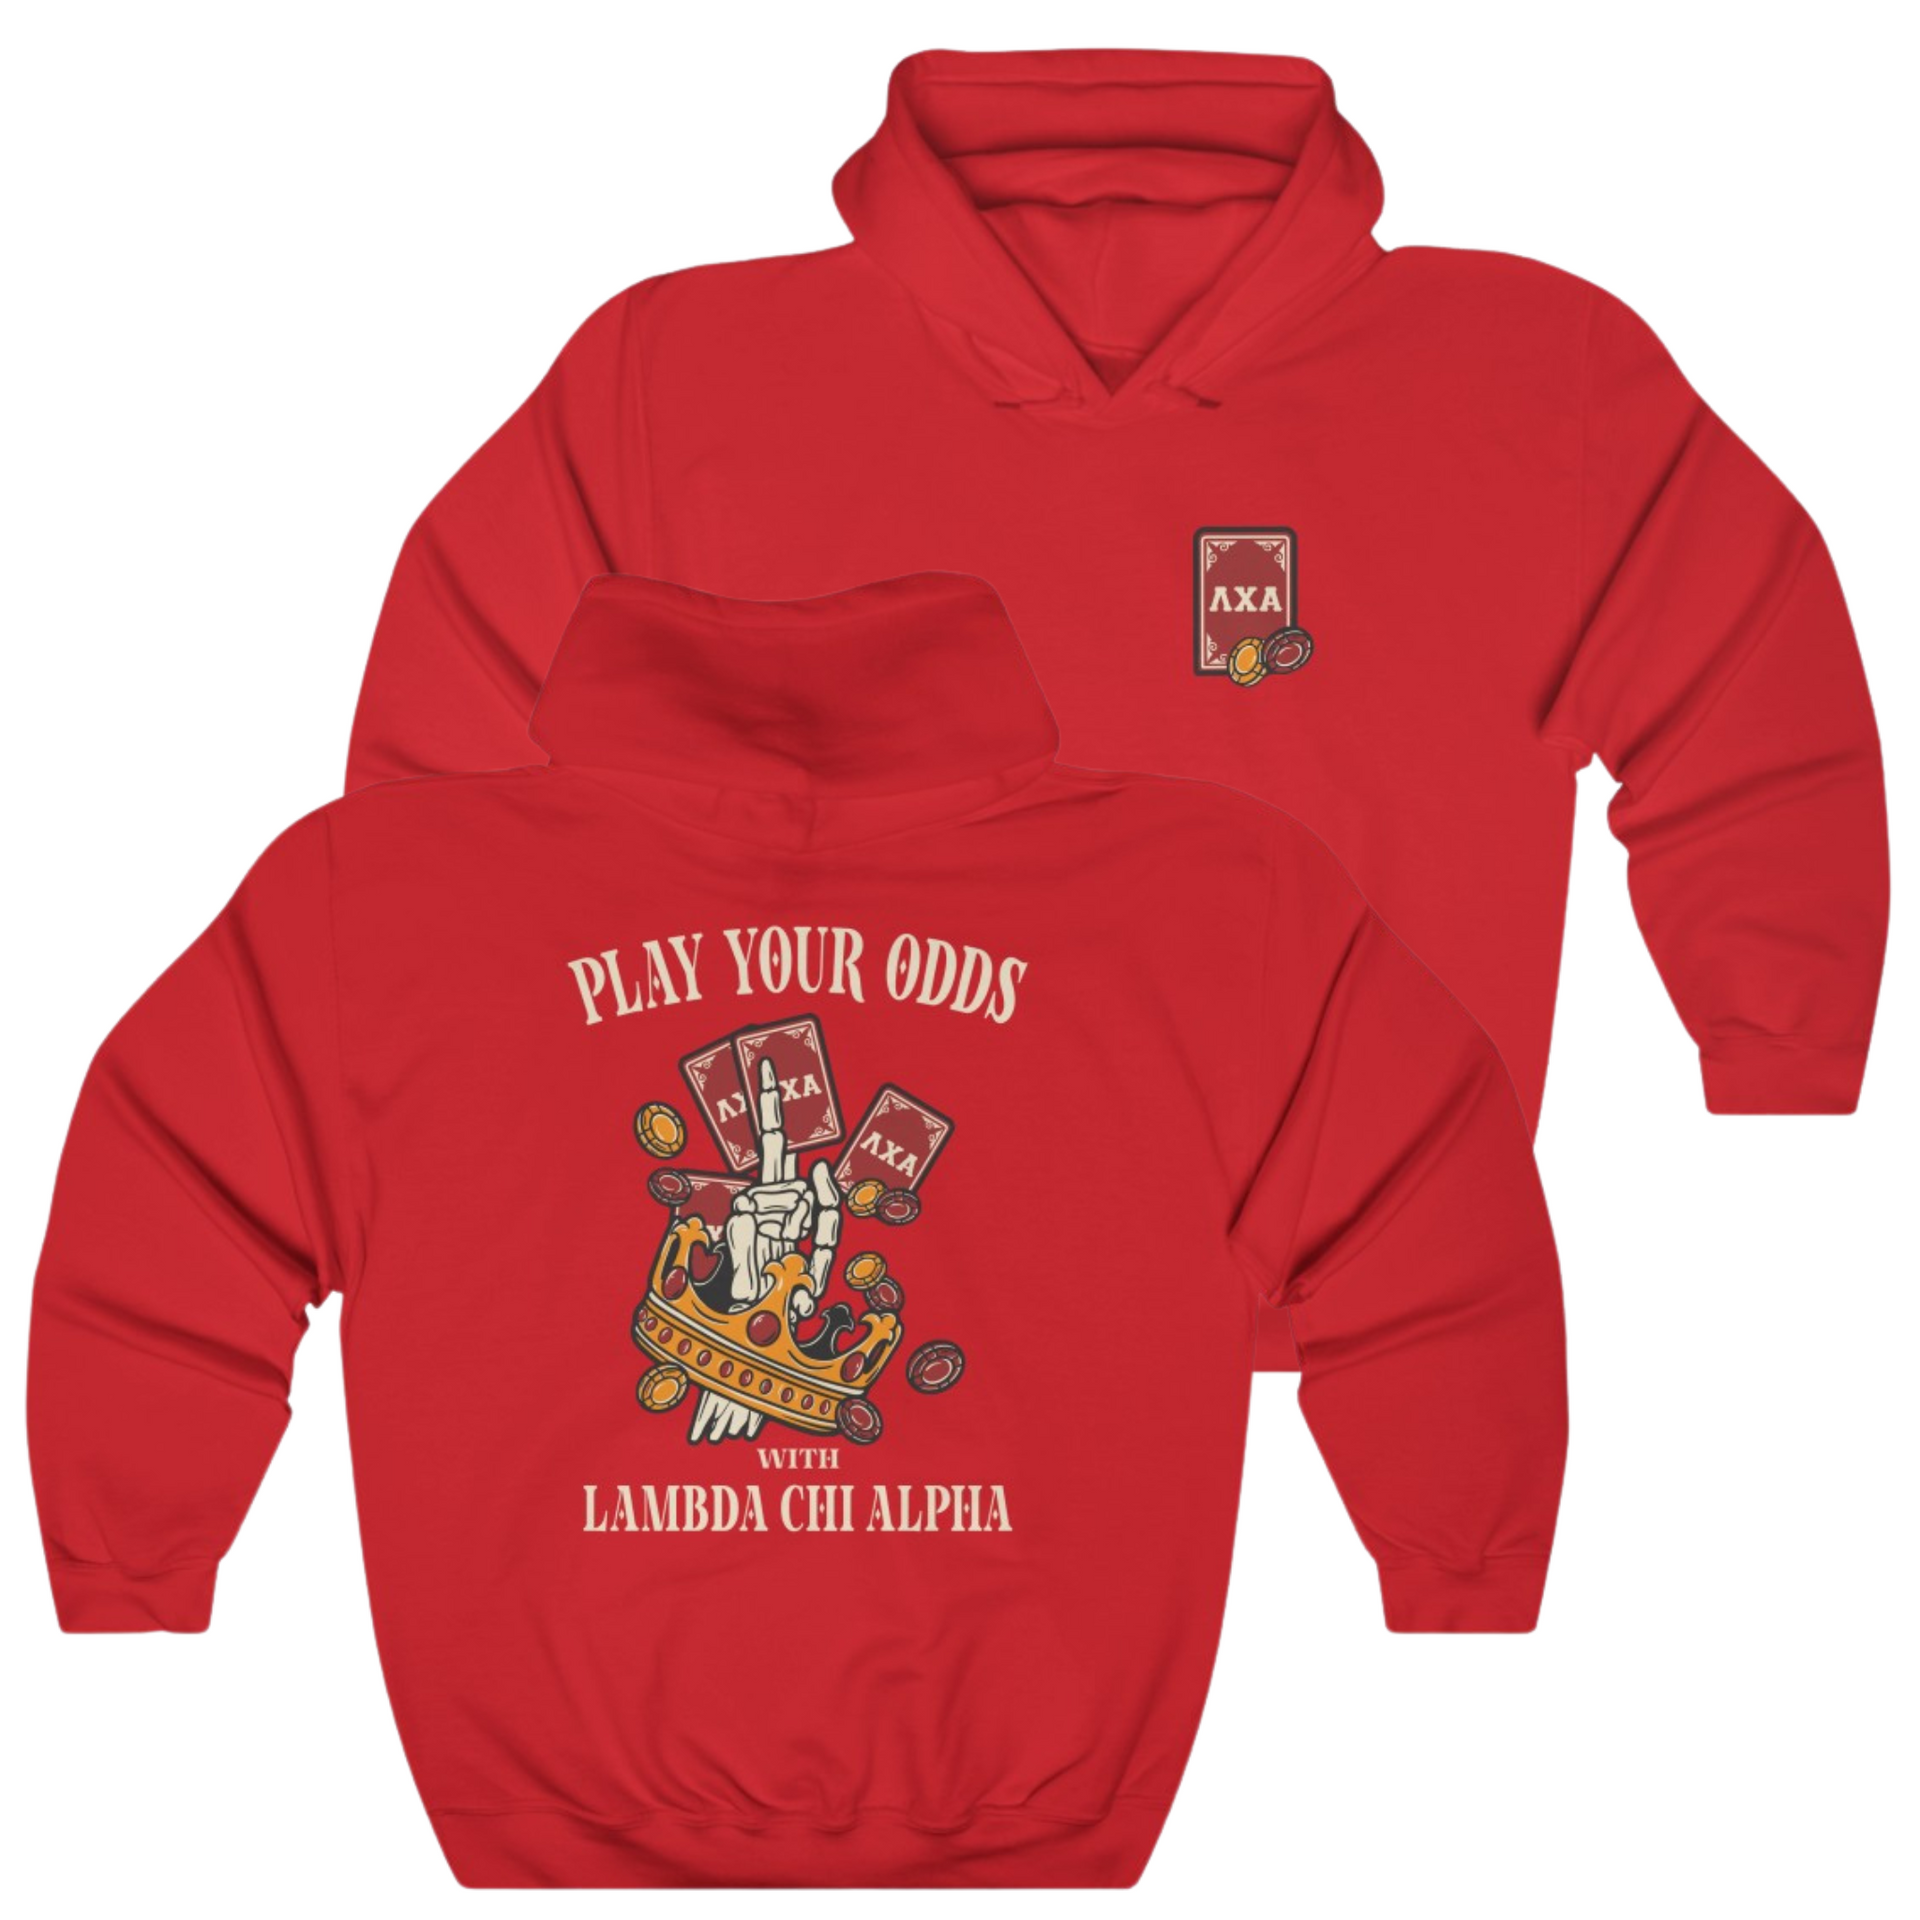 Red Lambda Chi Alpha Graphic Hoodie | Play Your Odds | Lambda Chi Alpha Fraternity Apparel 